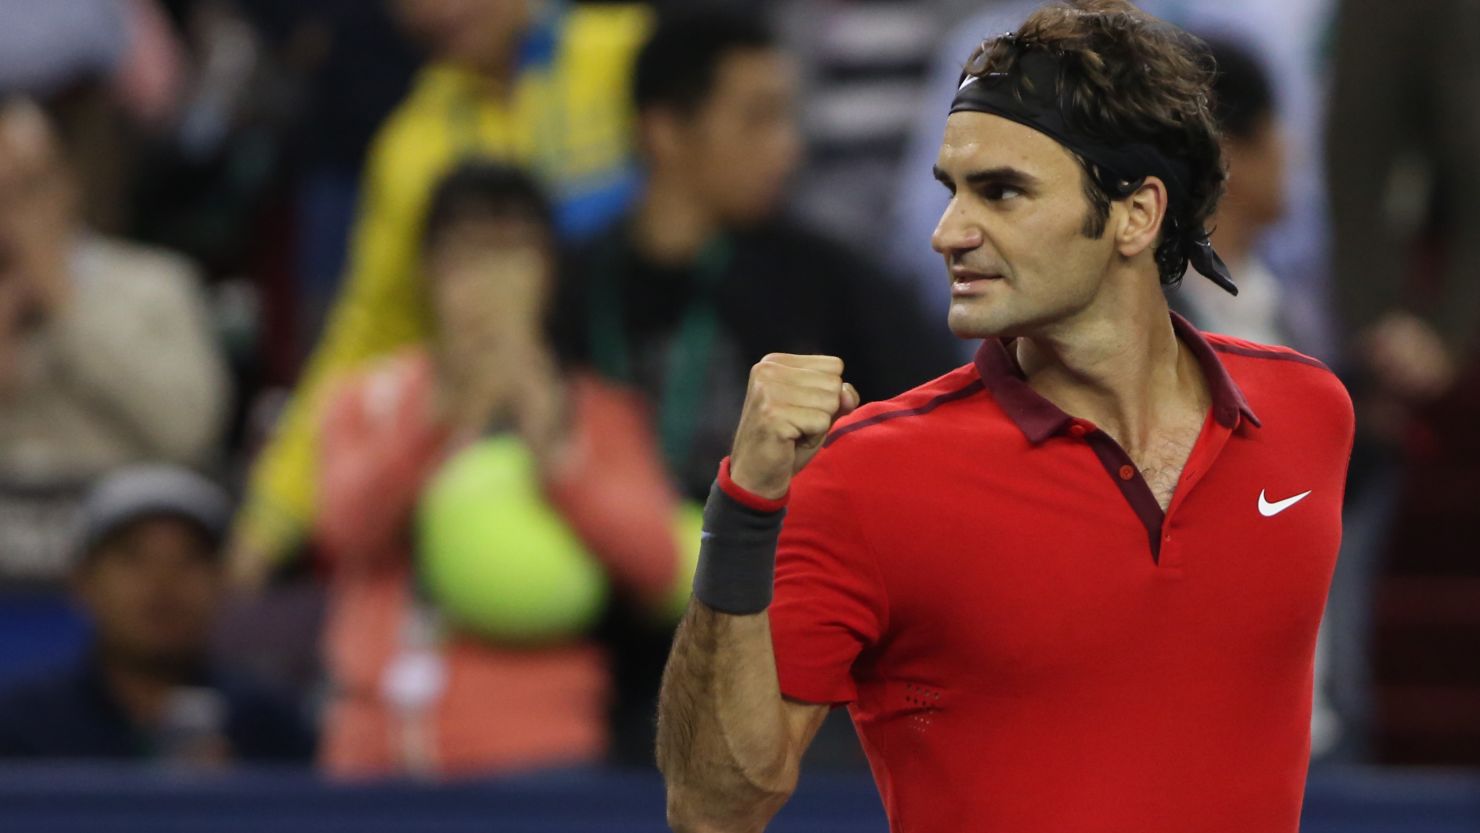 Roger Federer  reacts after winning his semifinal match against Novak Djokovic at the Shanghai Masters.